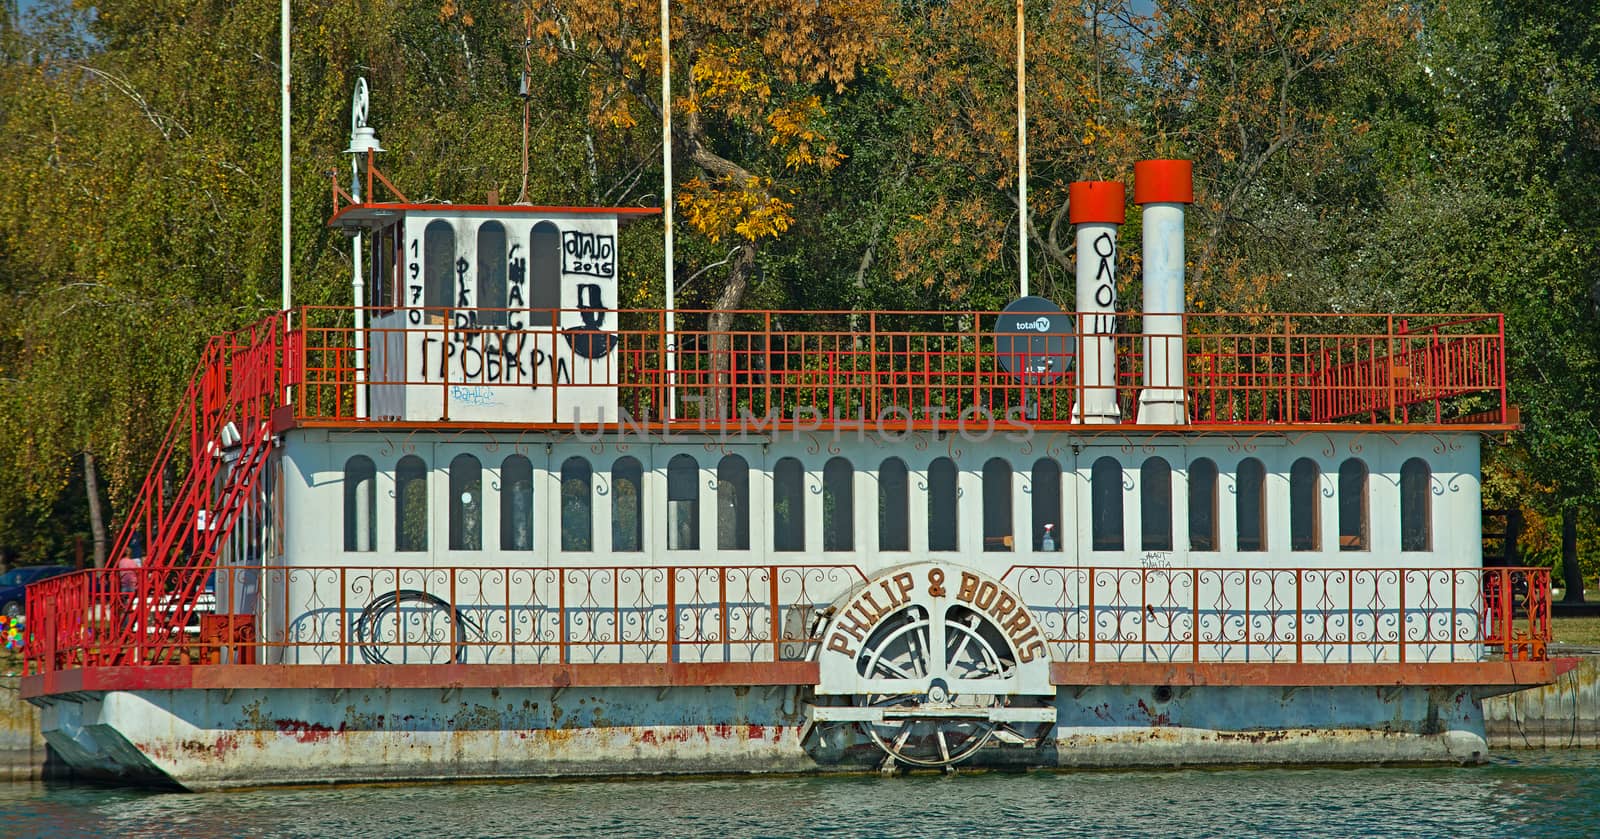 PALIC, SERBIA - October 13th 2018 - side view on a white and red raft that look like a boat by sheriffkule